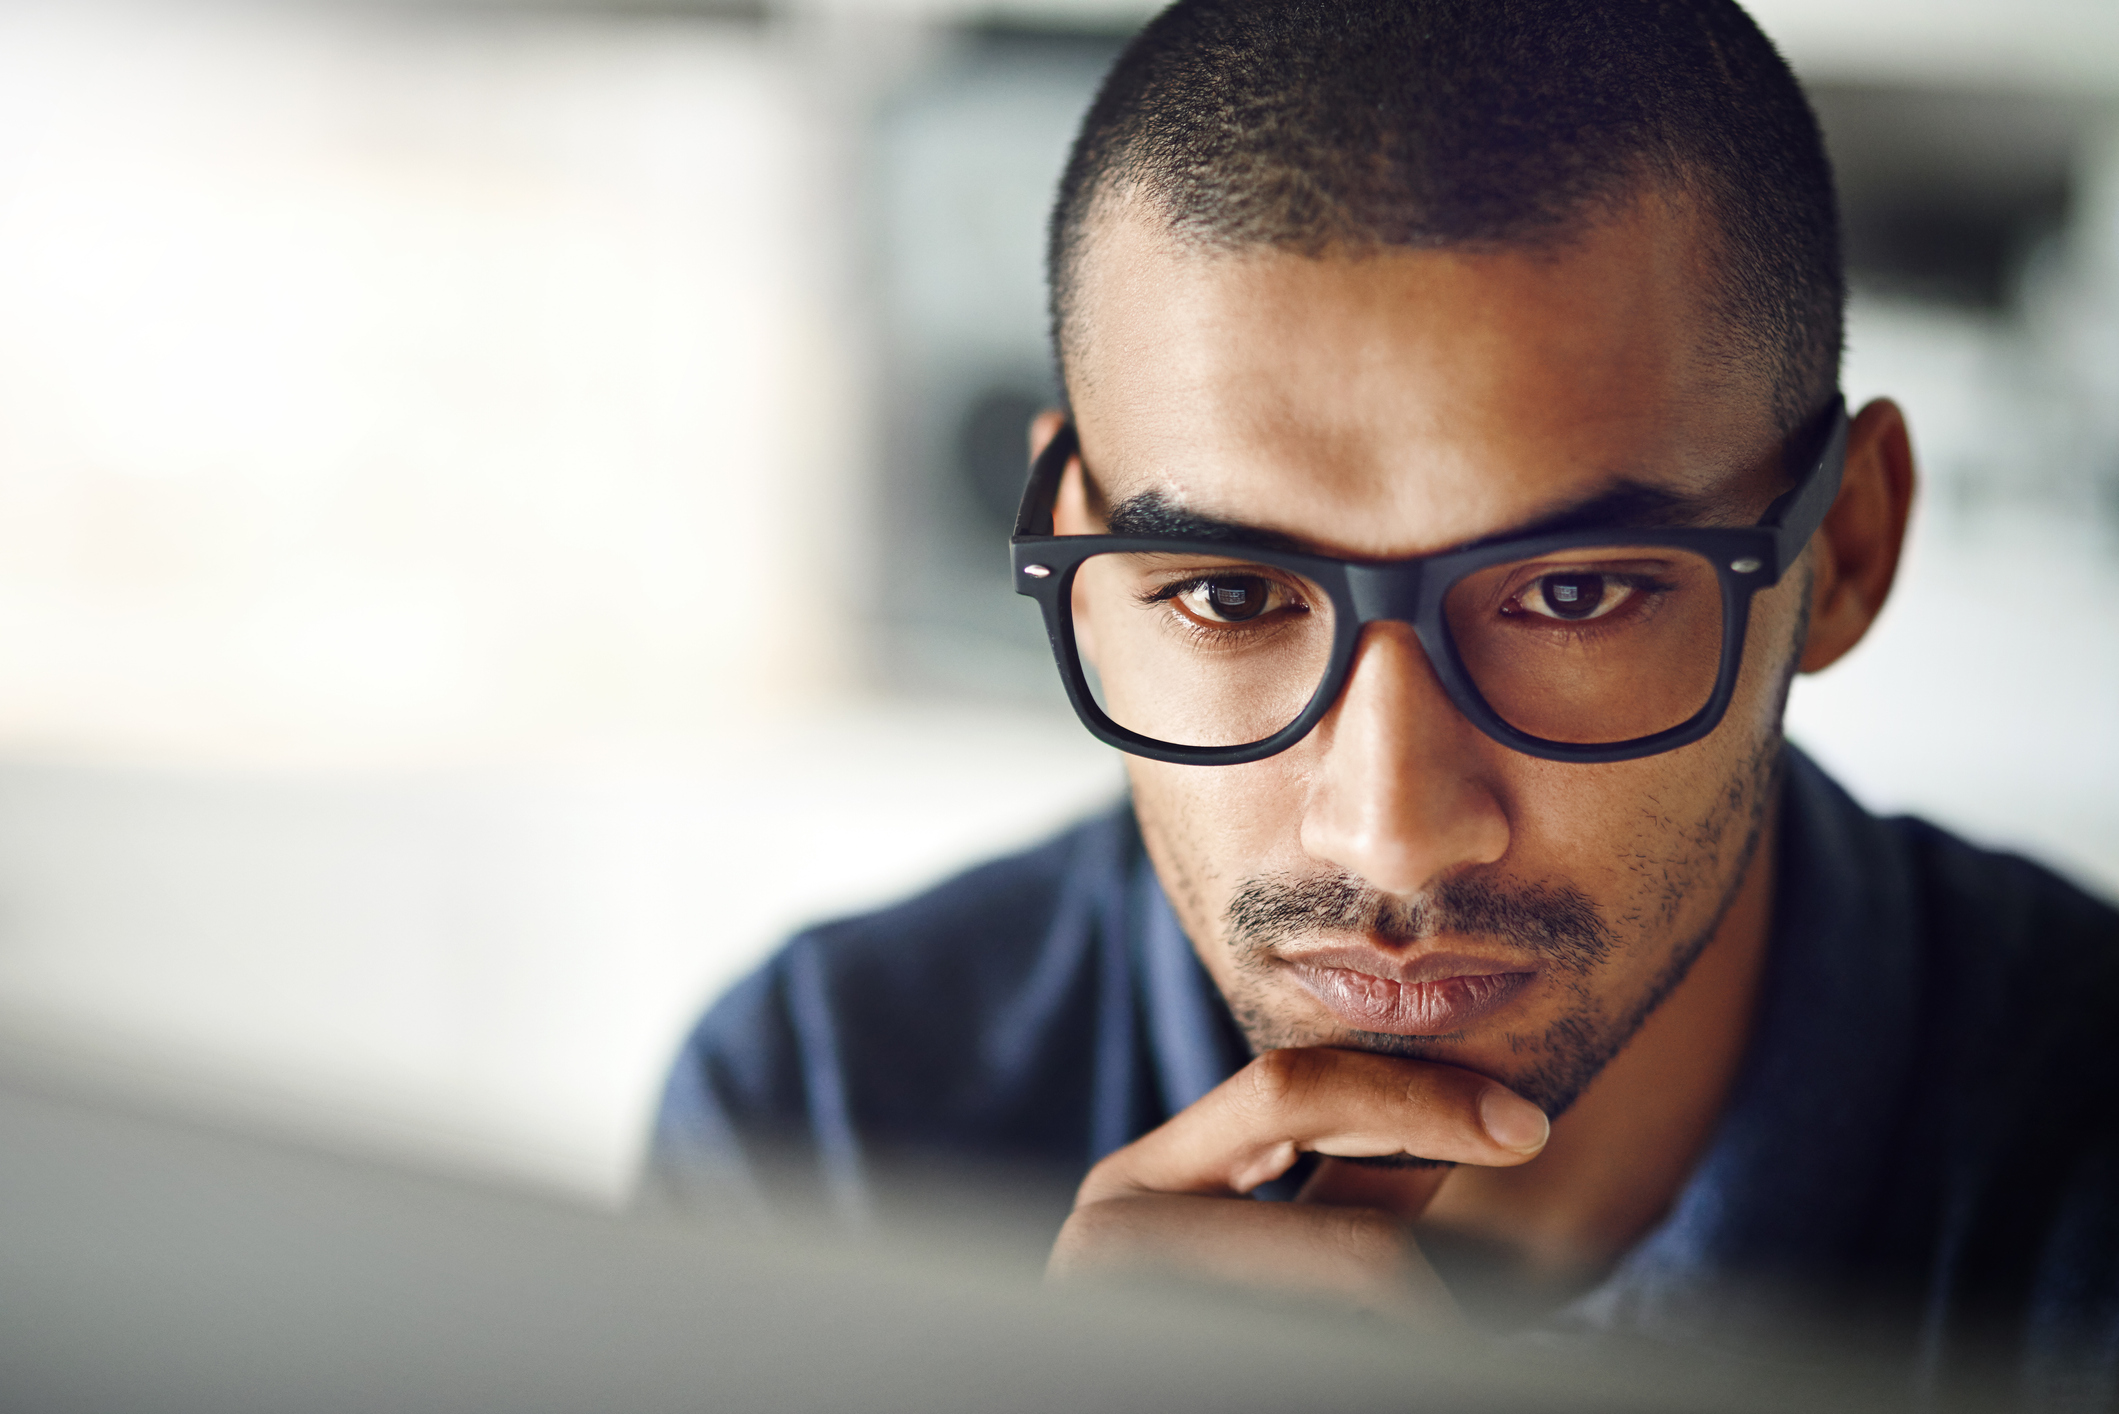 young man wearing glasses looking at a computer screen while deep in thought